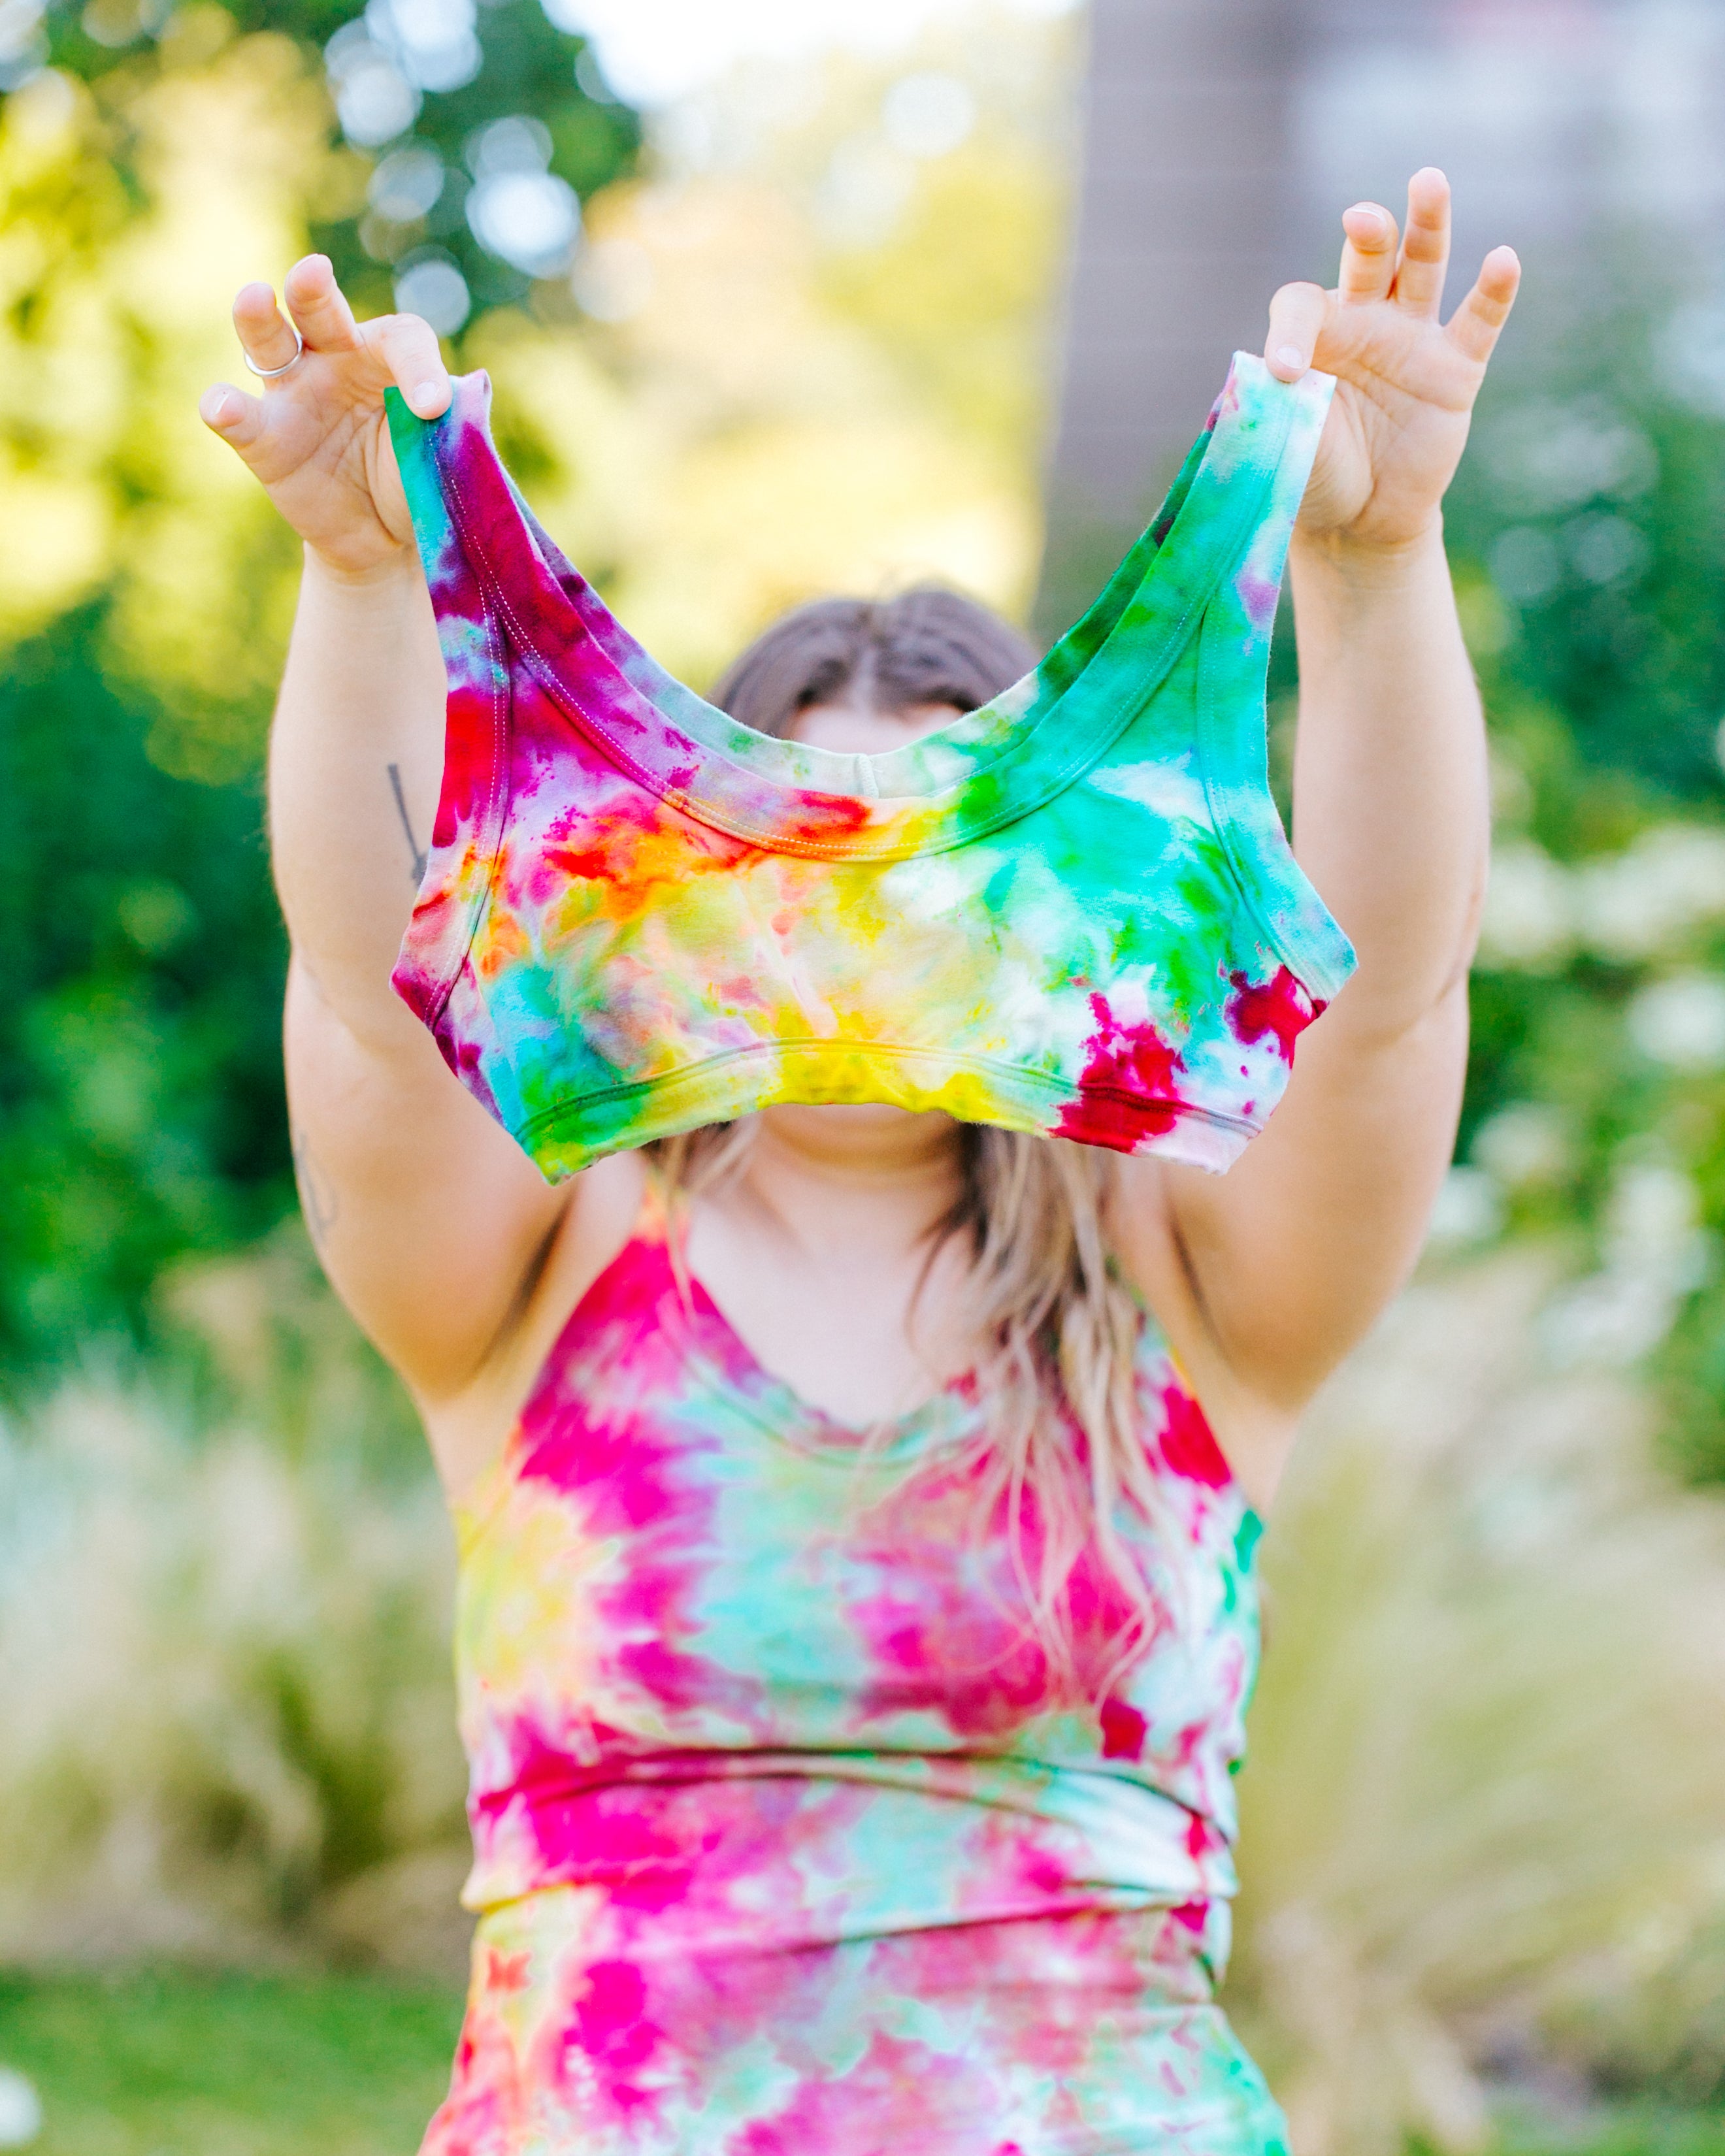 Model holding up an Ice Dye Bralette with a mix of bright yellow, pink, green, and blue colors.